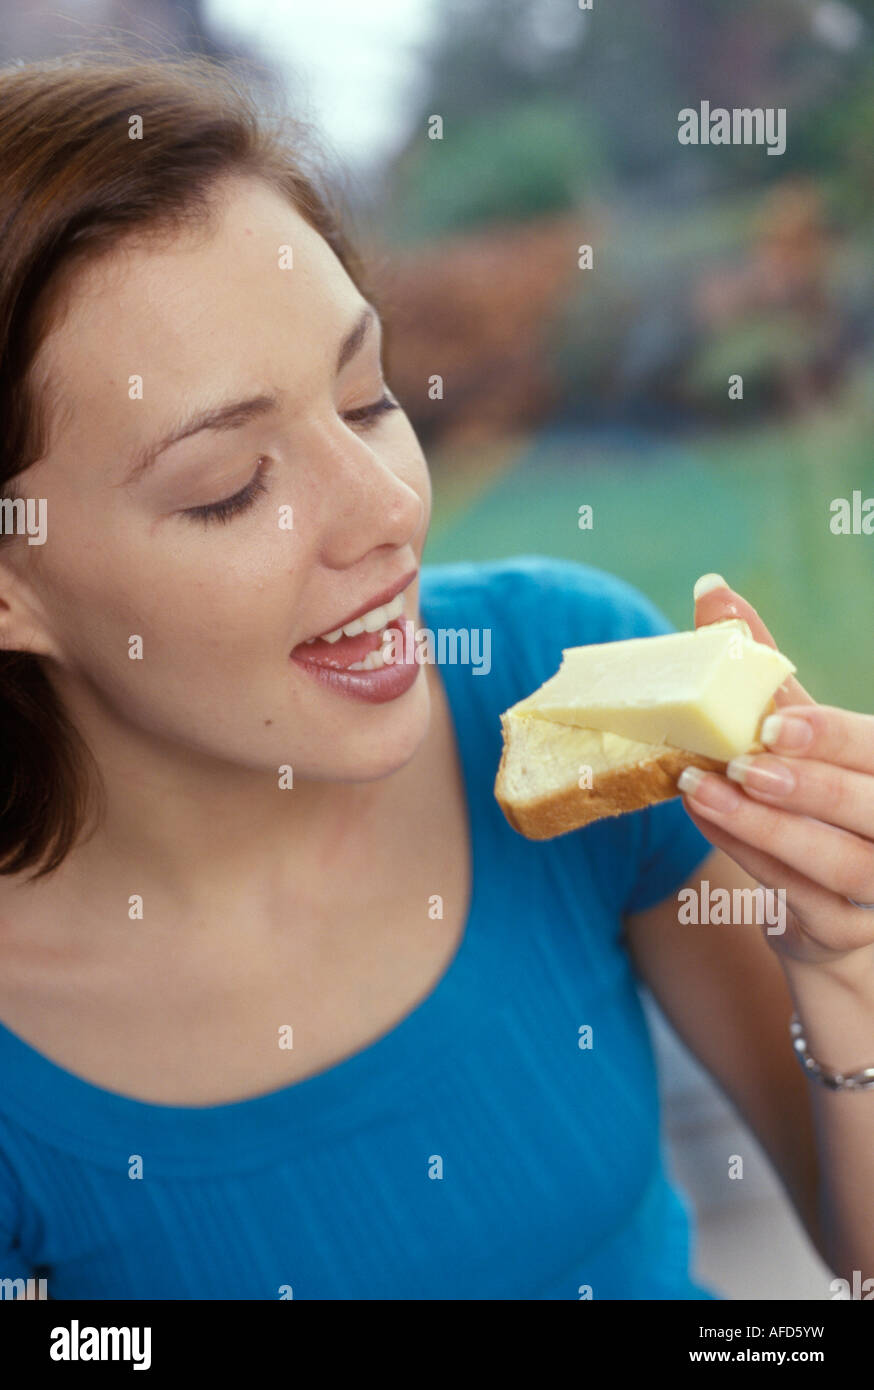 woman eating a piece of bread and cheese Stock Photo